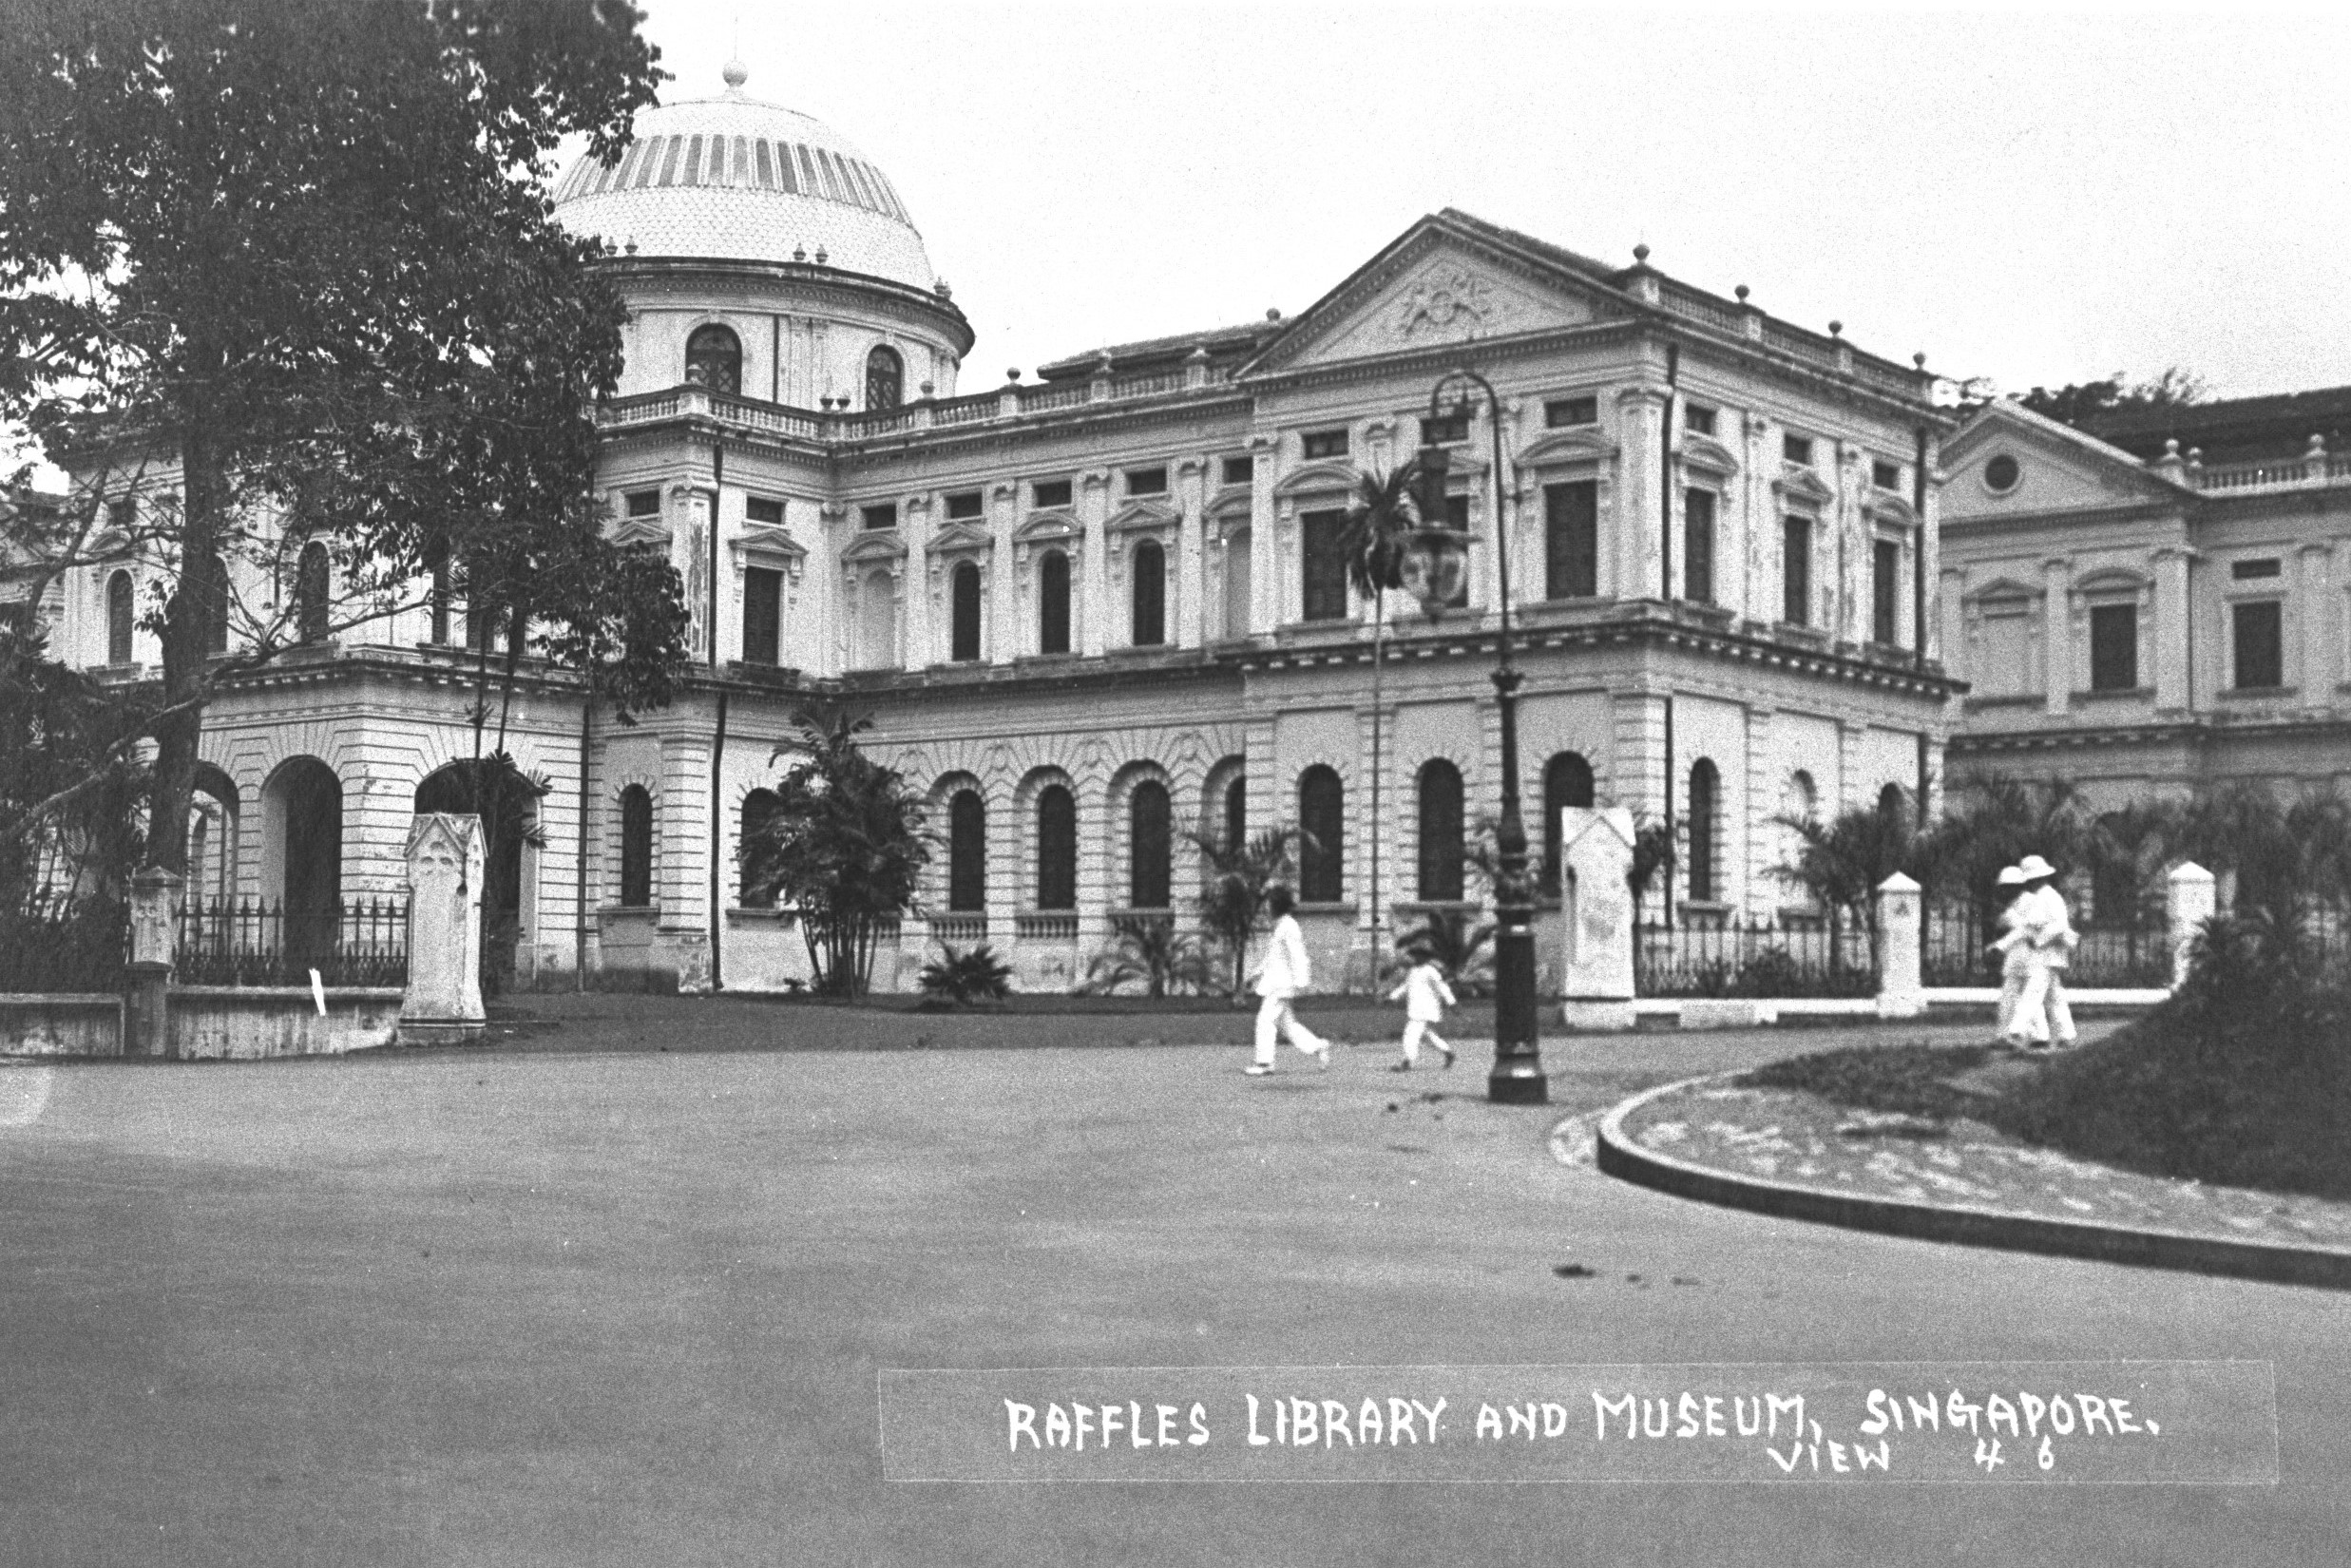 Raffles Library and Museum (now the National Museum of Singapore) at Stamford Road, Singapore